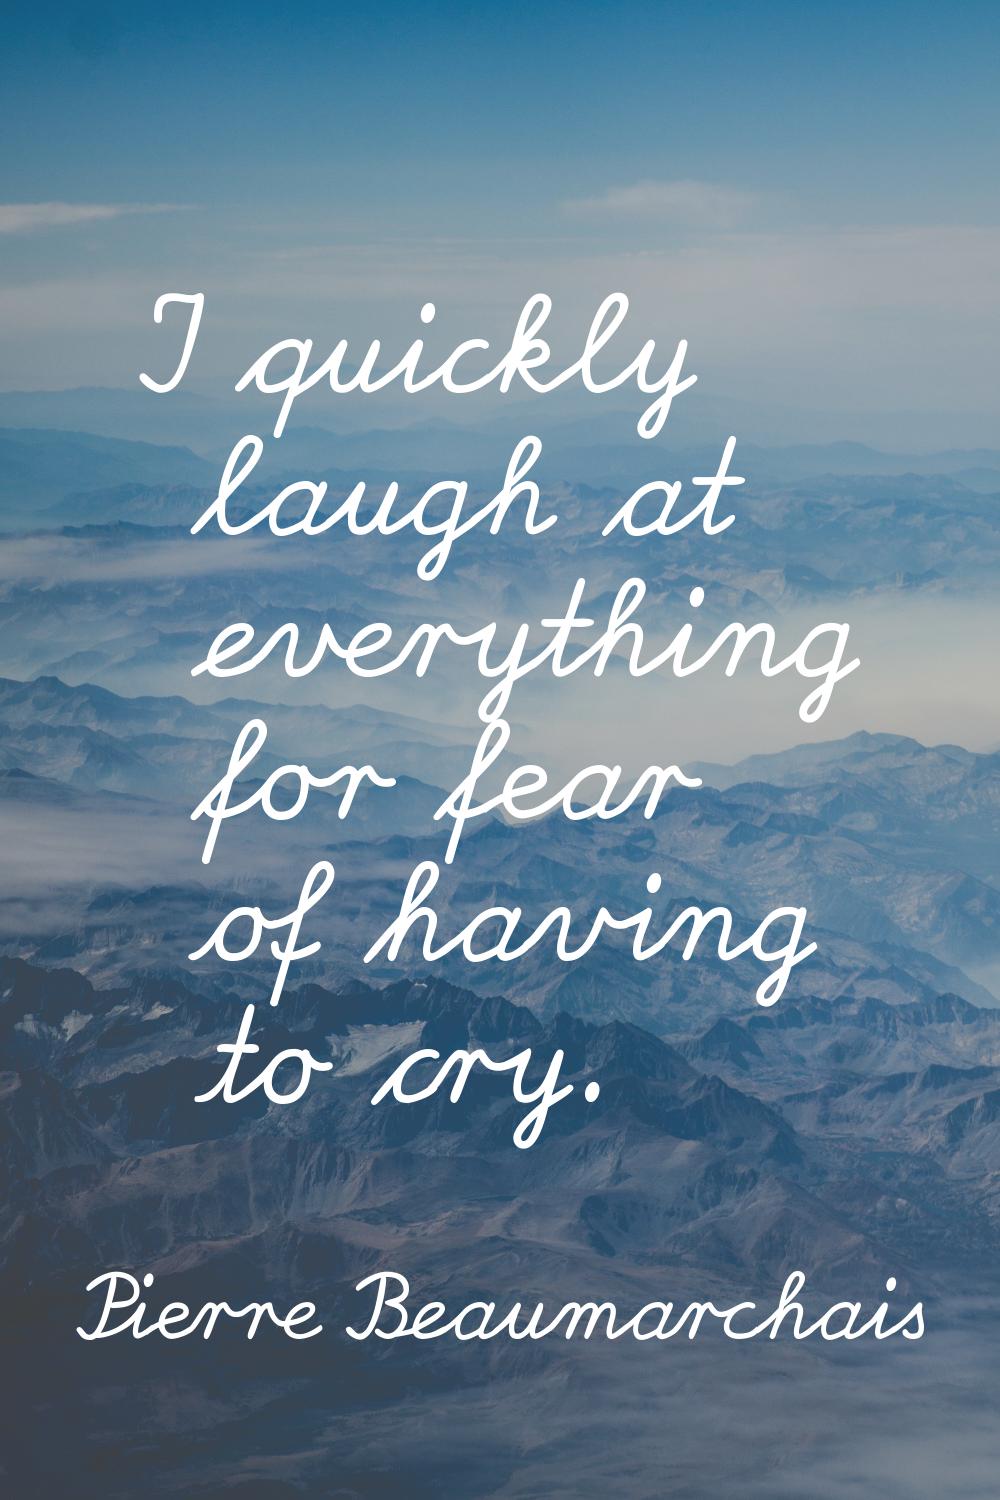 I quickly laugh at everything for fear of having to cry.